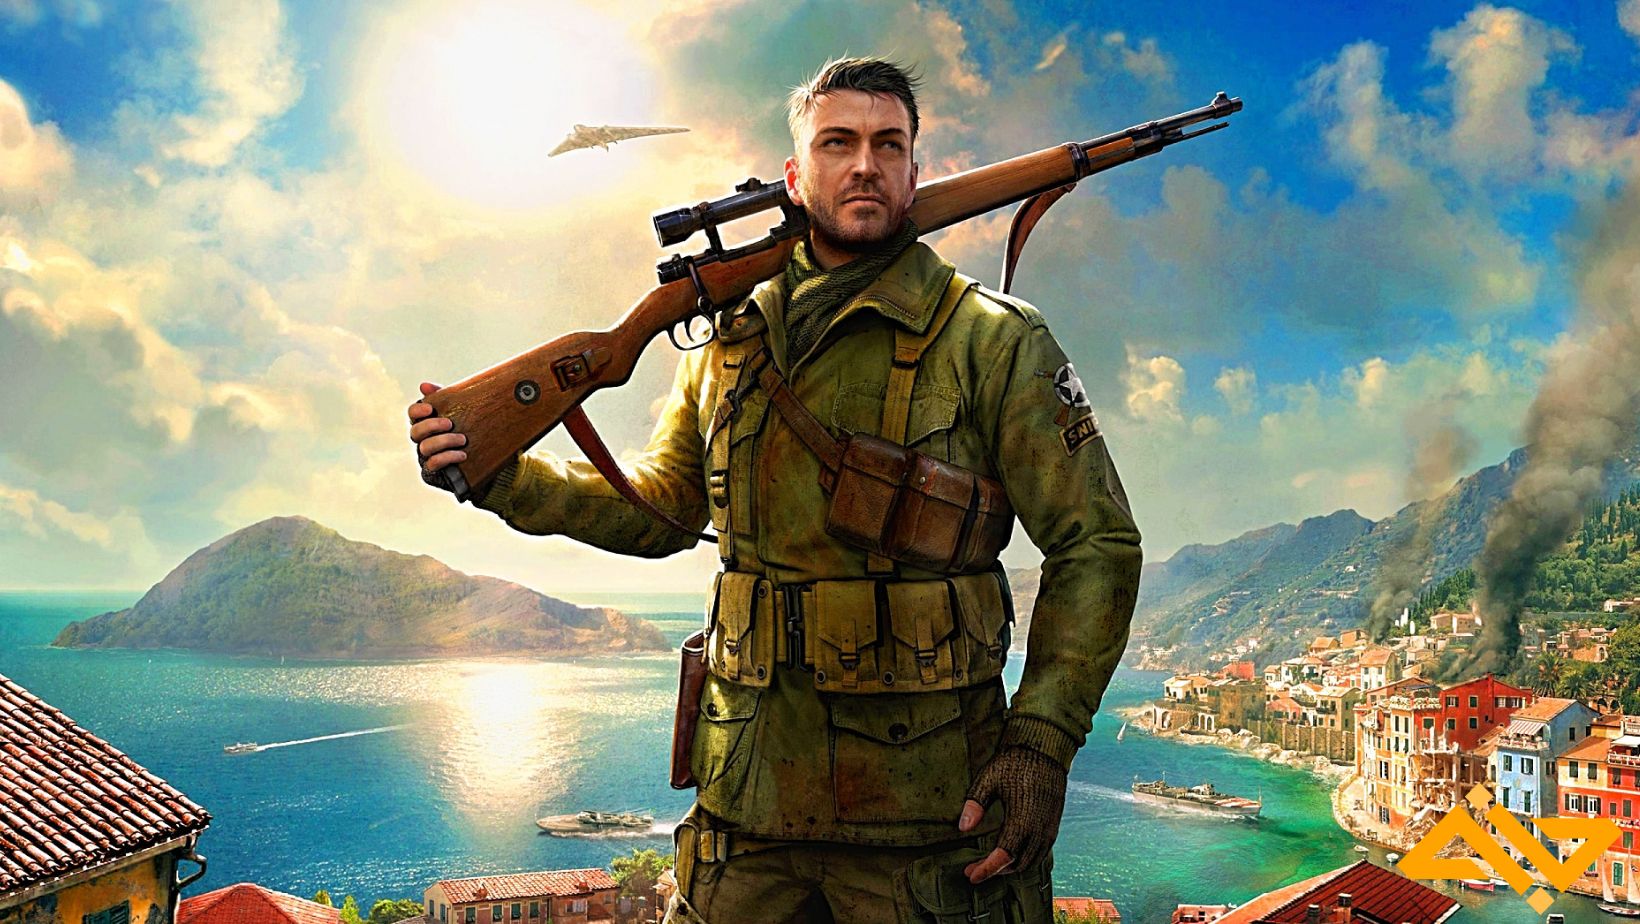 Just like Sniper Elite 5, you play as elite marksman Karl Fairburne, but this time around, you are dropped in Italy.